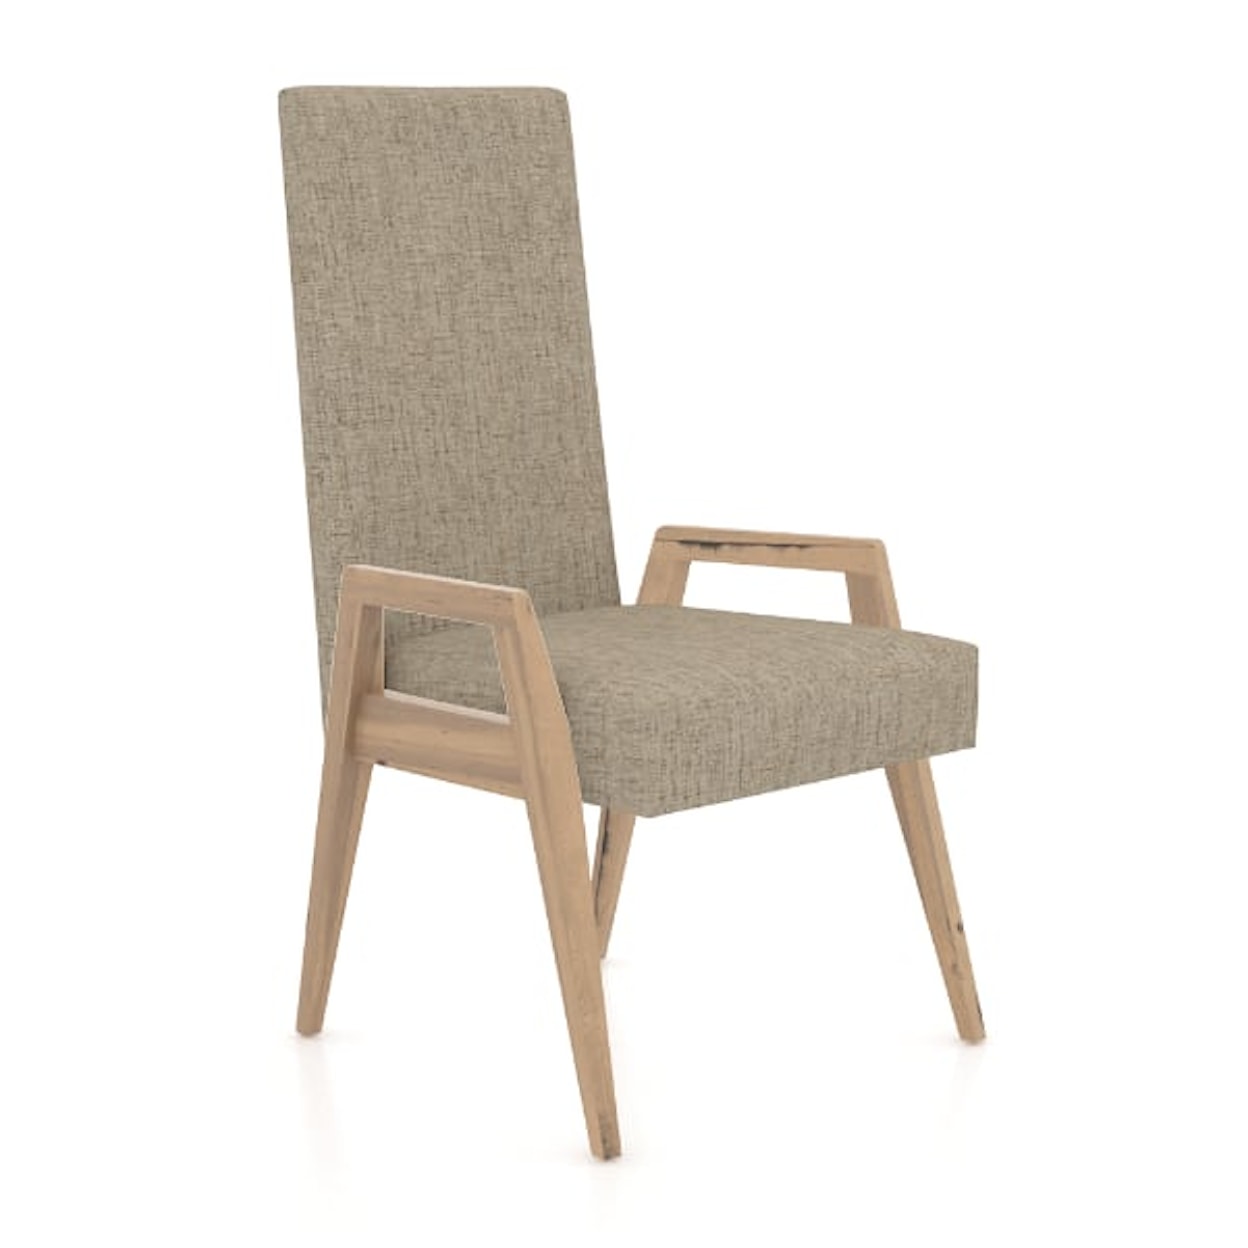 Canadel East Side Upholstered Chair